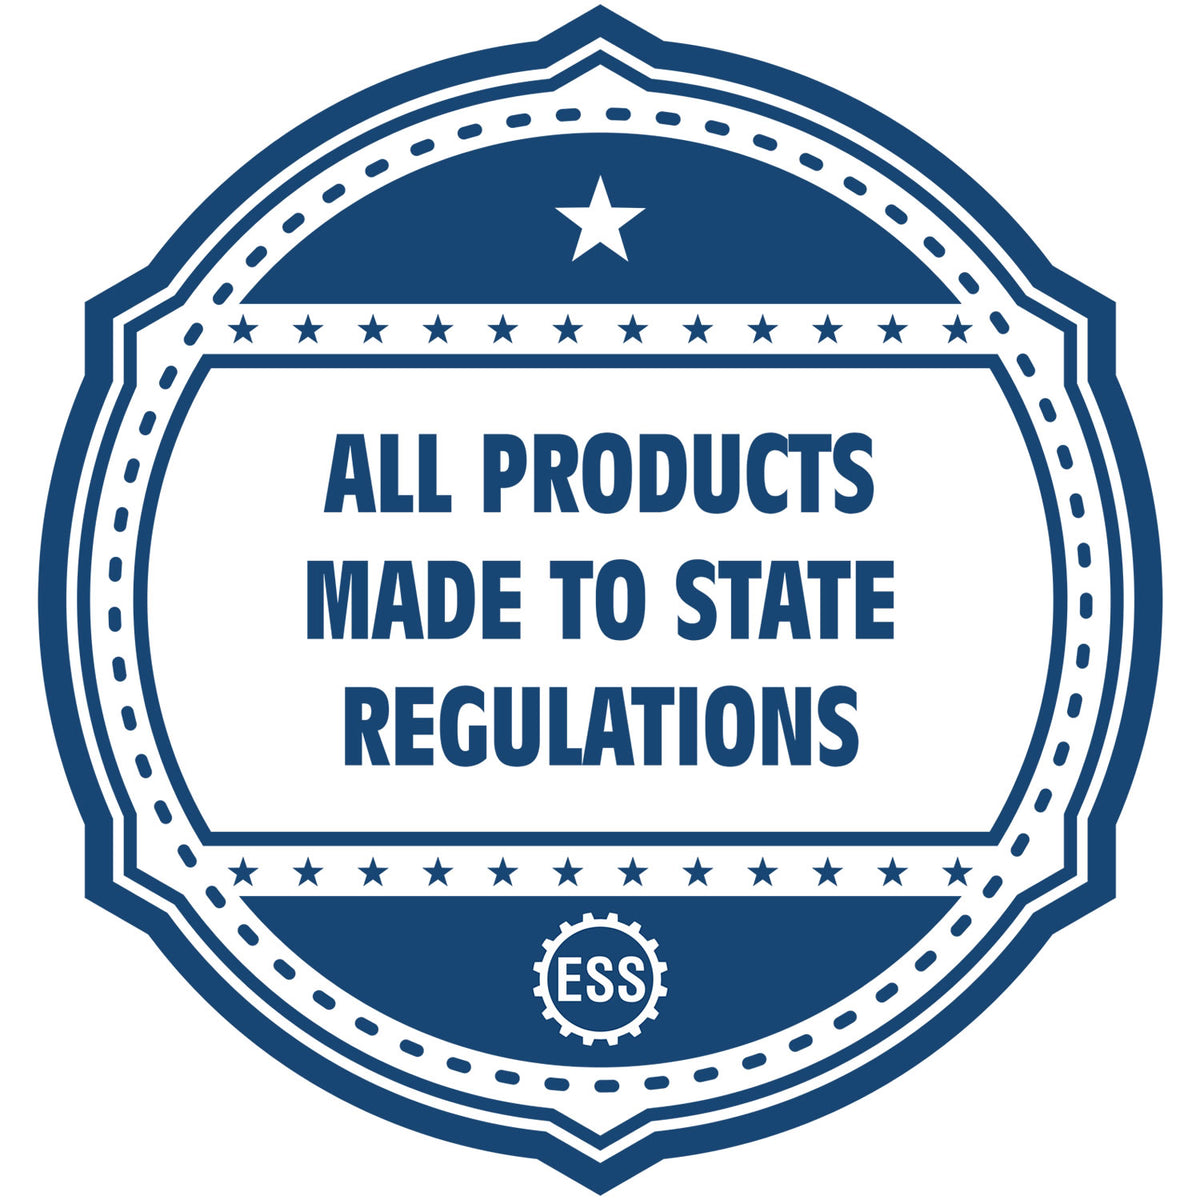 An icon or badge element for the Extended Long Reach Idaho Architect Seal Embosser showing that this product is made in compliance with state regulations.